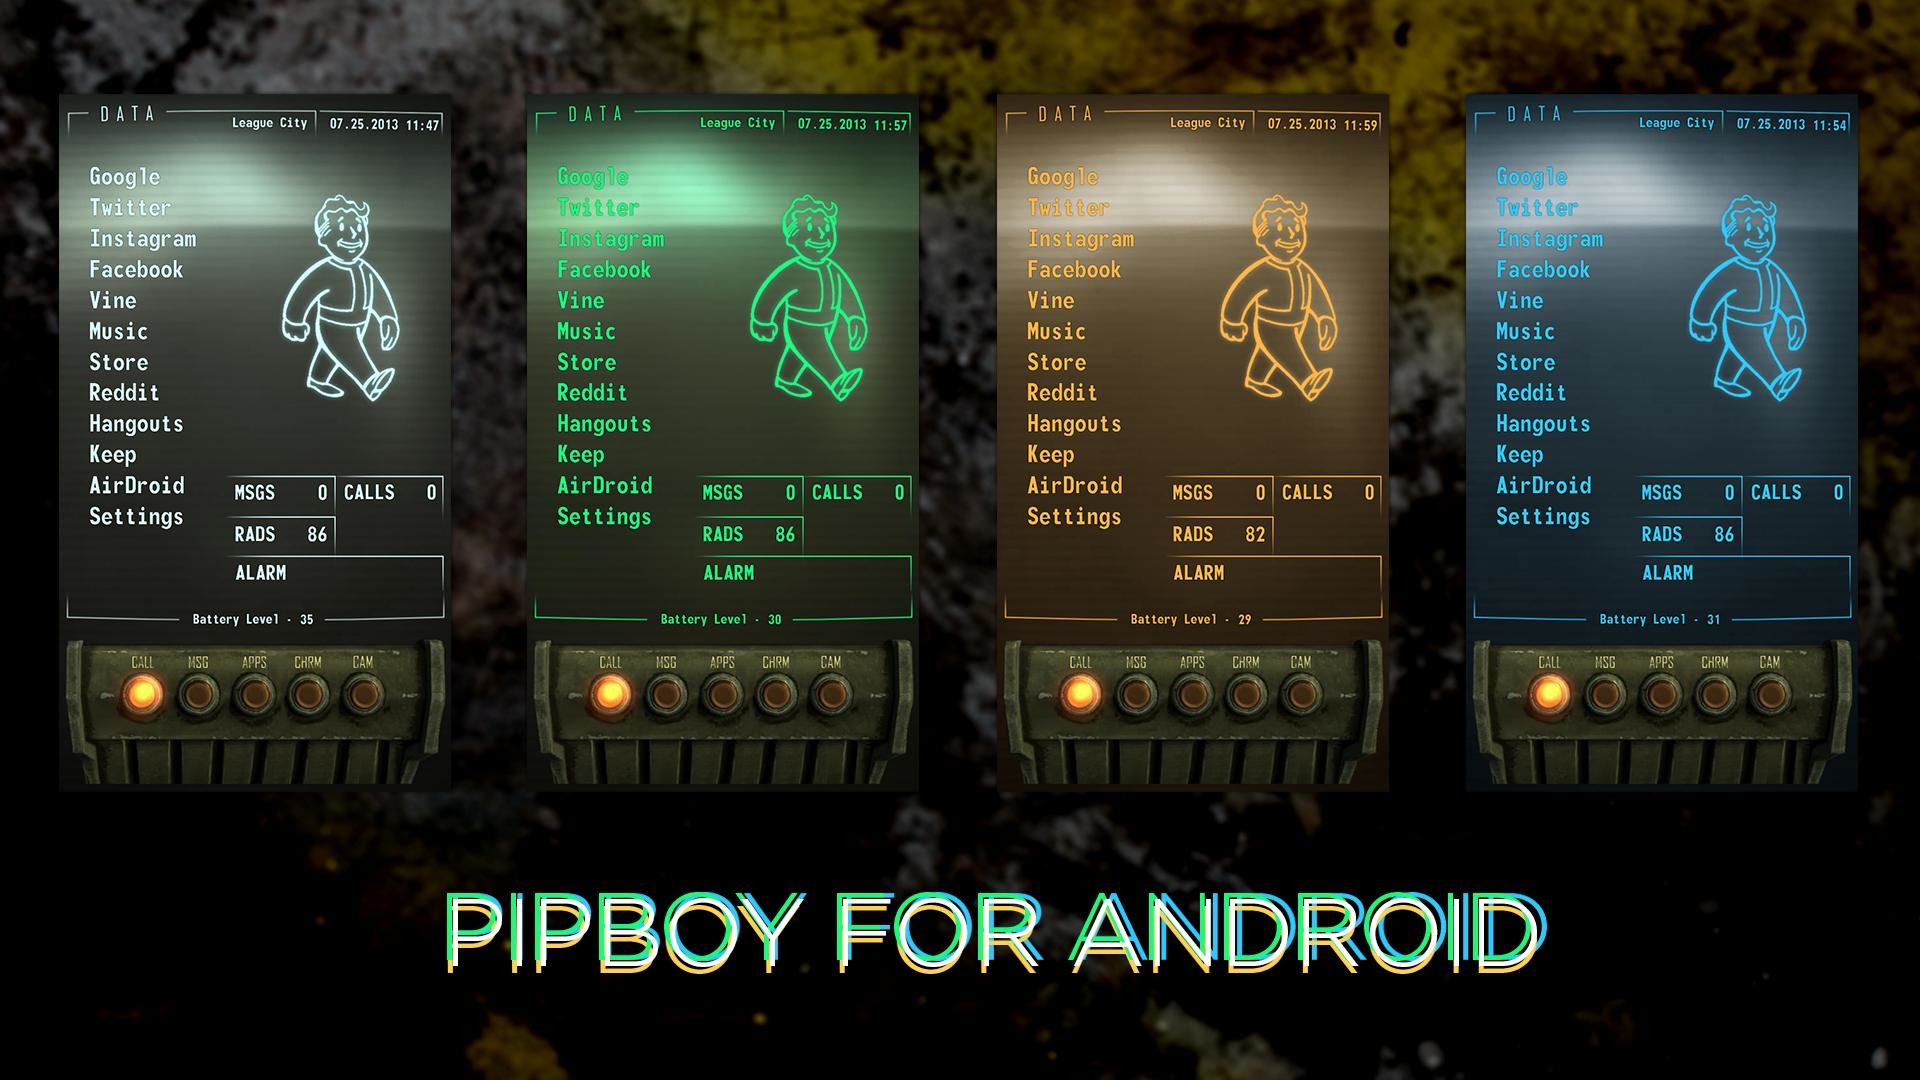 1920x1080 I give you my improved Fallout PipBoy Android theme! [x-post from  r/fallout] ...